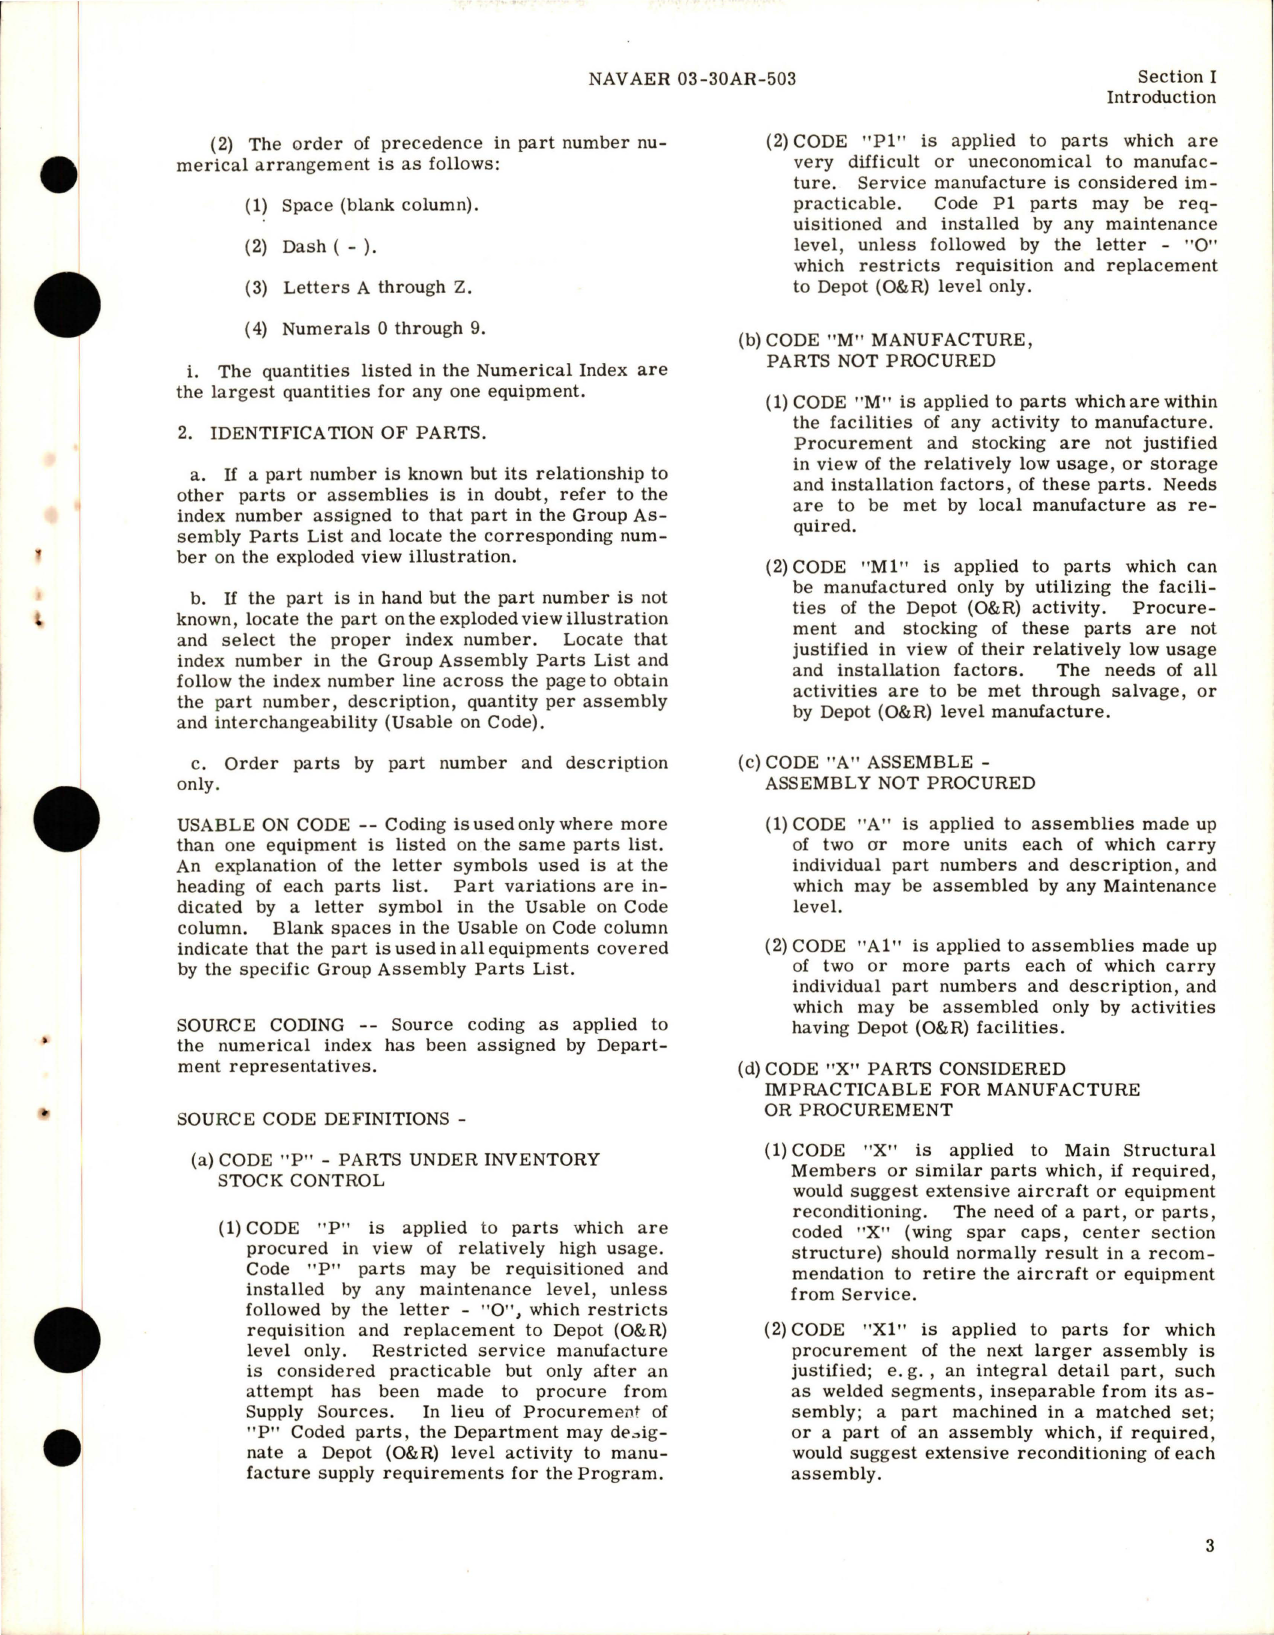 Sample page 5 from AirCorps Library document: Illustrated Parts Breakdown for Elecrtro-Pneumatic Interlock Valves - Parts 747-100 and 747-138 